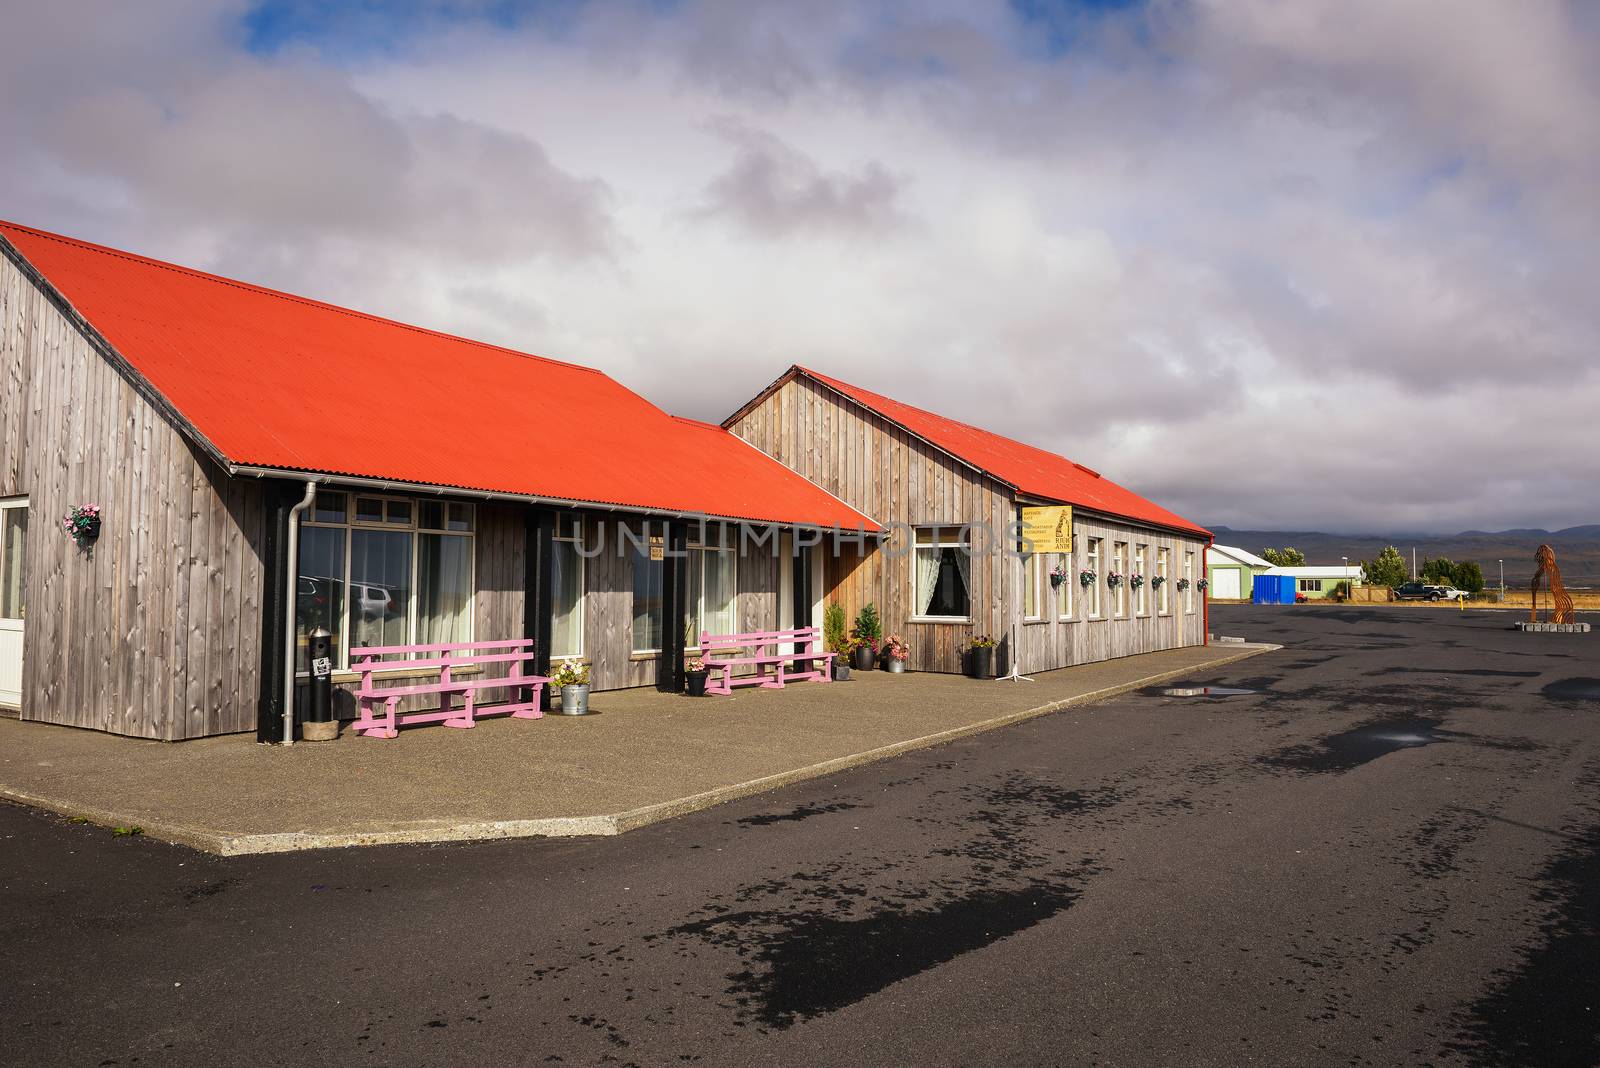 Hotel Rjukandi with a restaurant on the Snaefellsnes peninsula in Iceland by nickfox